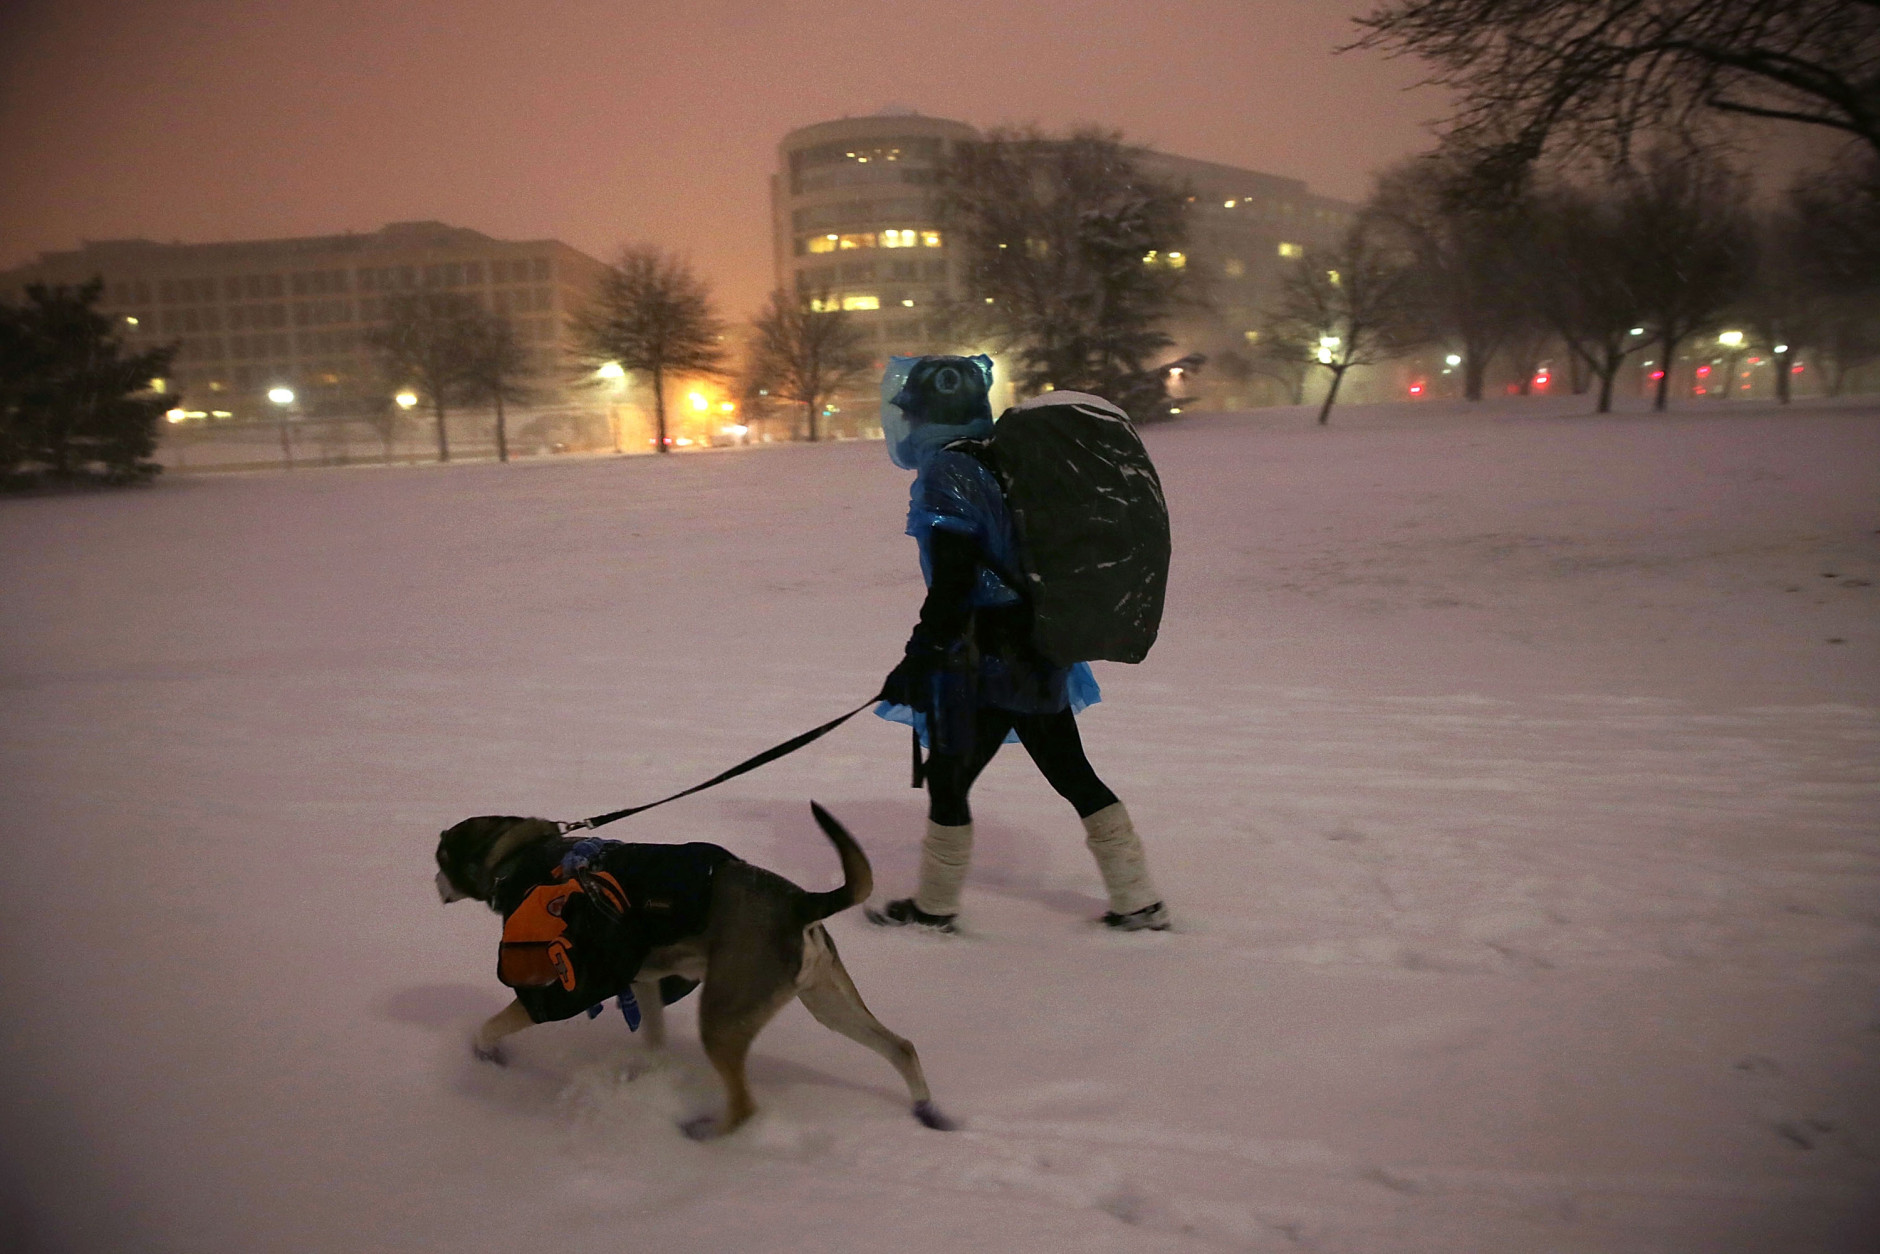 A woman walks with her dog in the snow January 22, 2016 in Washington, DC. A winter snowstorm is forecasted for the East Coast this weekend with prediction of up to 30 inches of snow for the DC area.  (Photo by Alex Wong/Getty Images)